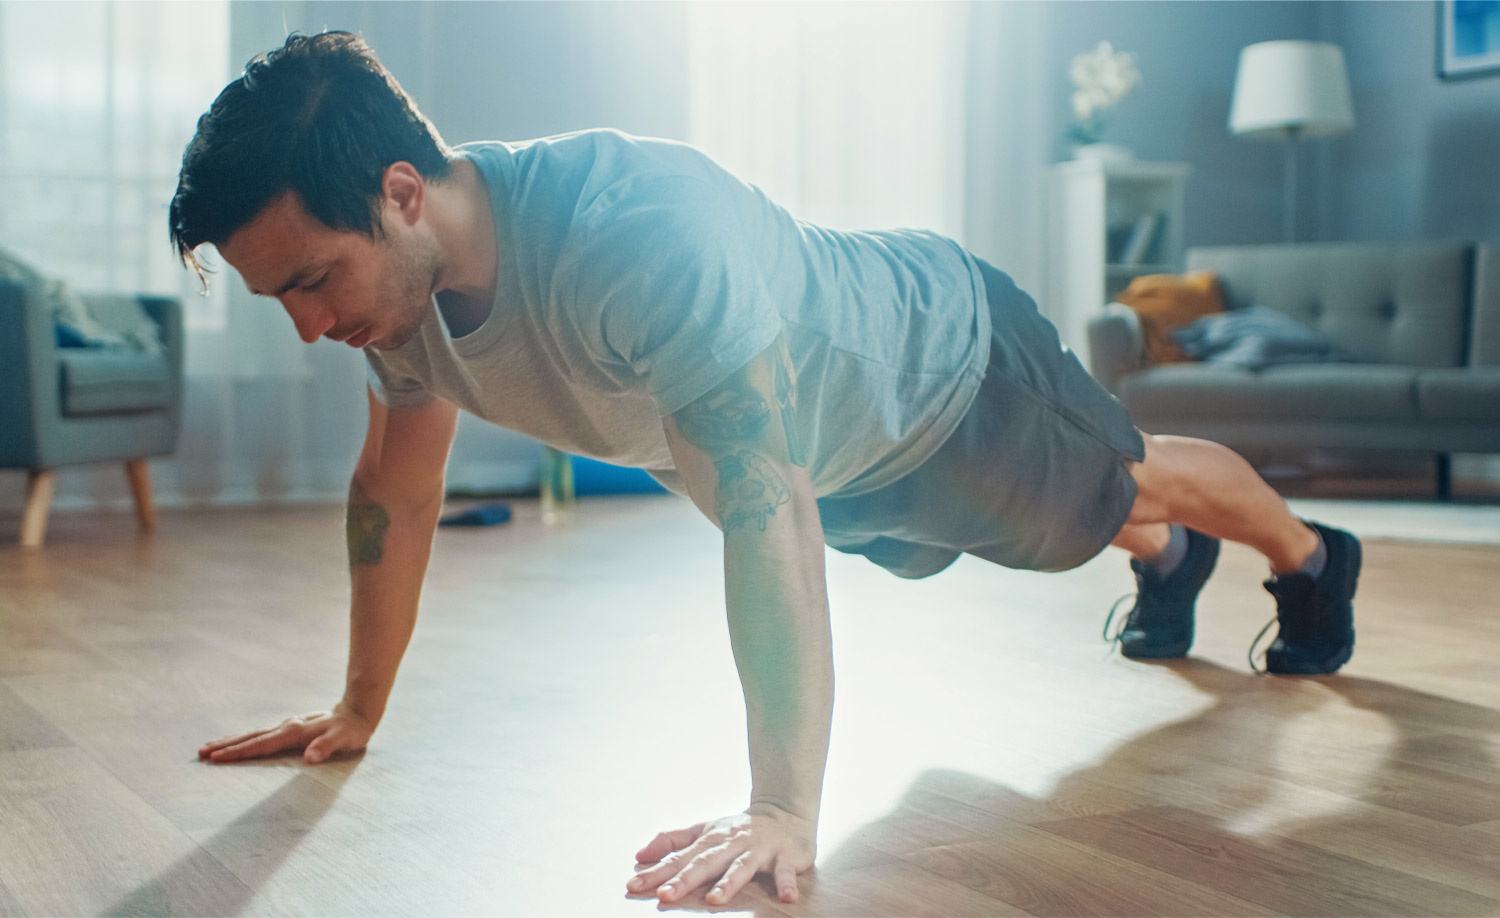 What are the advantages of push-ups and pull-ups?